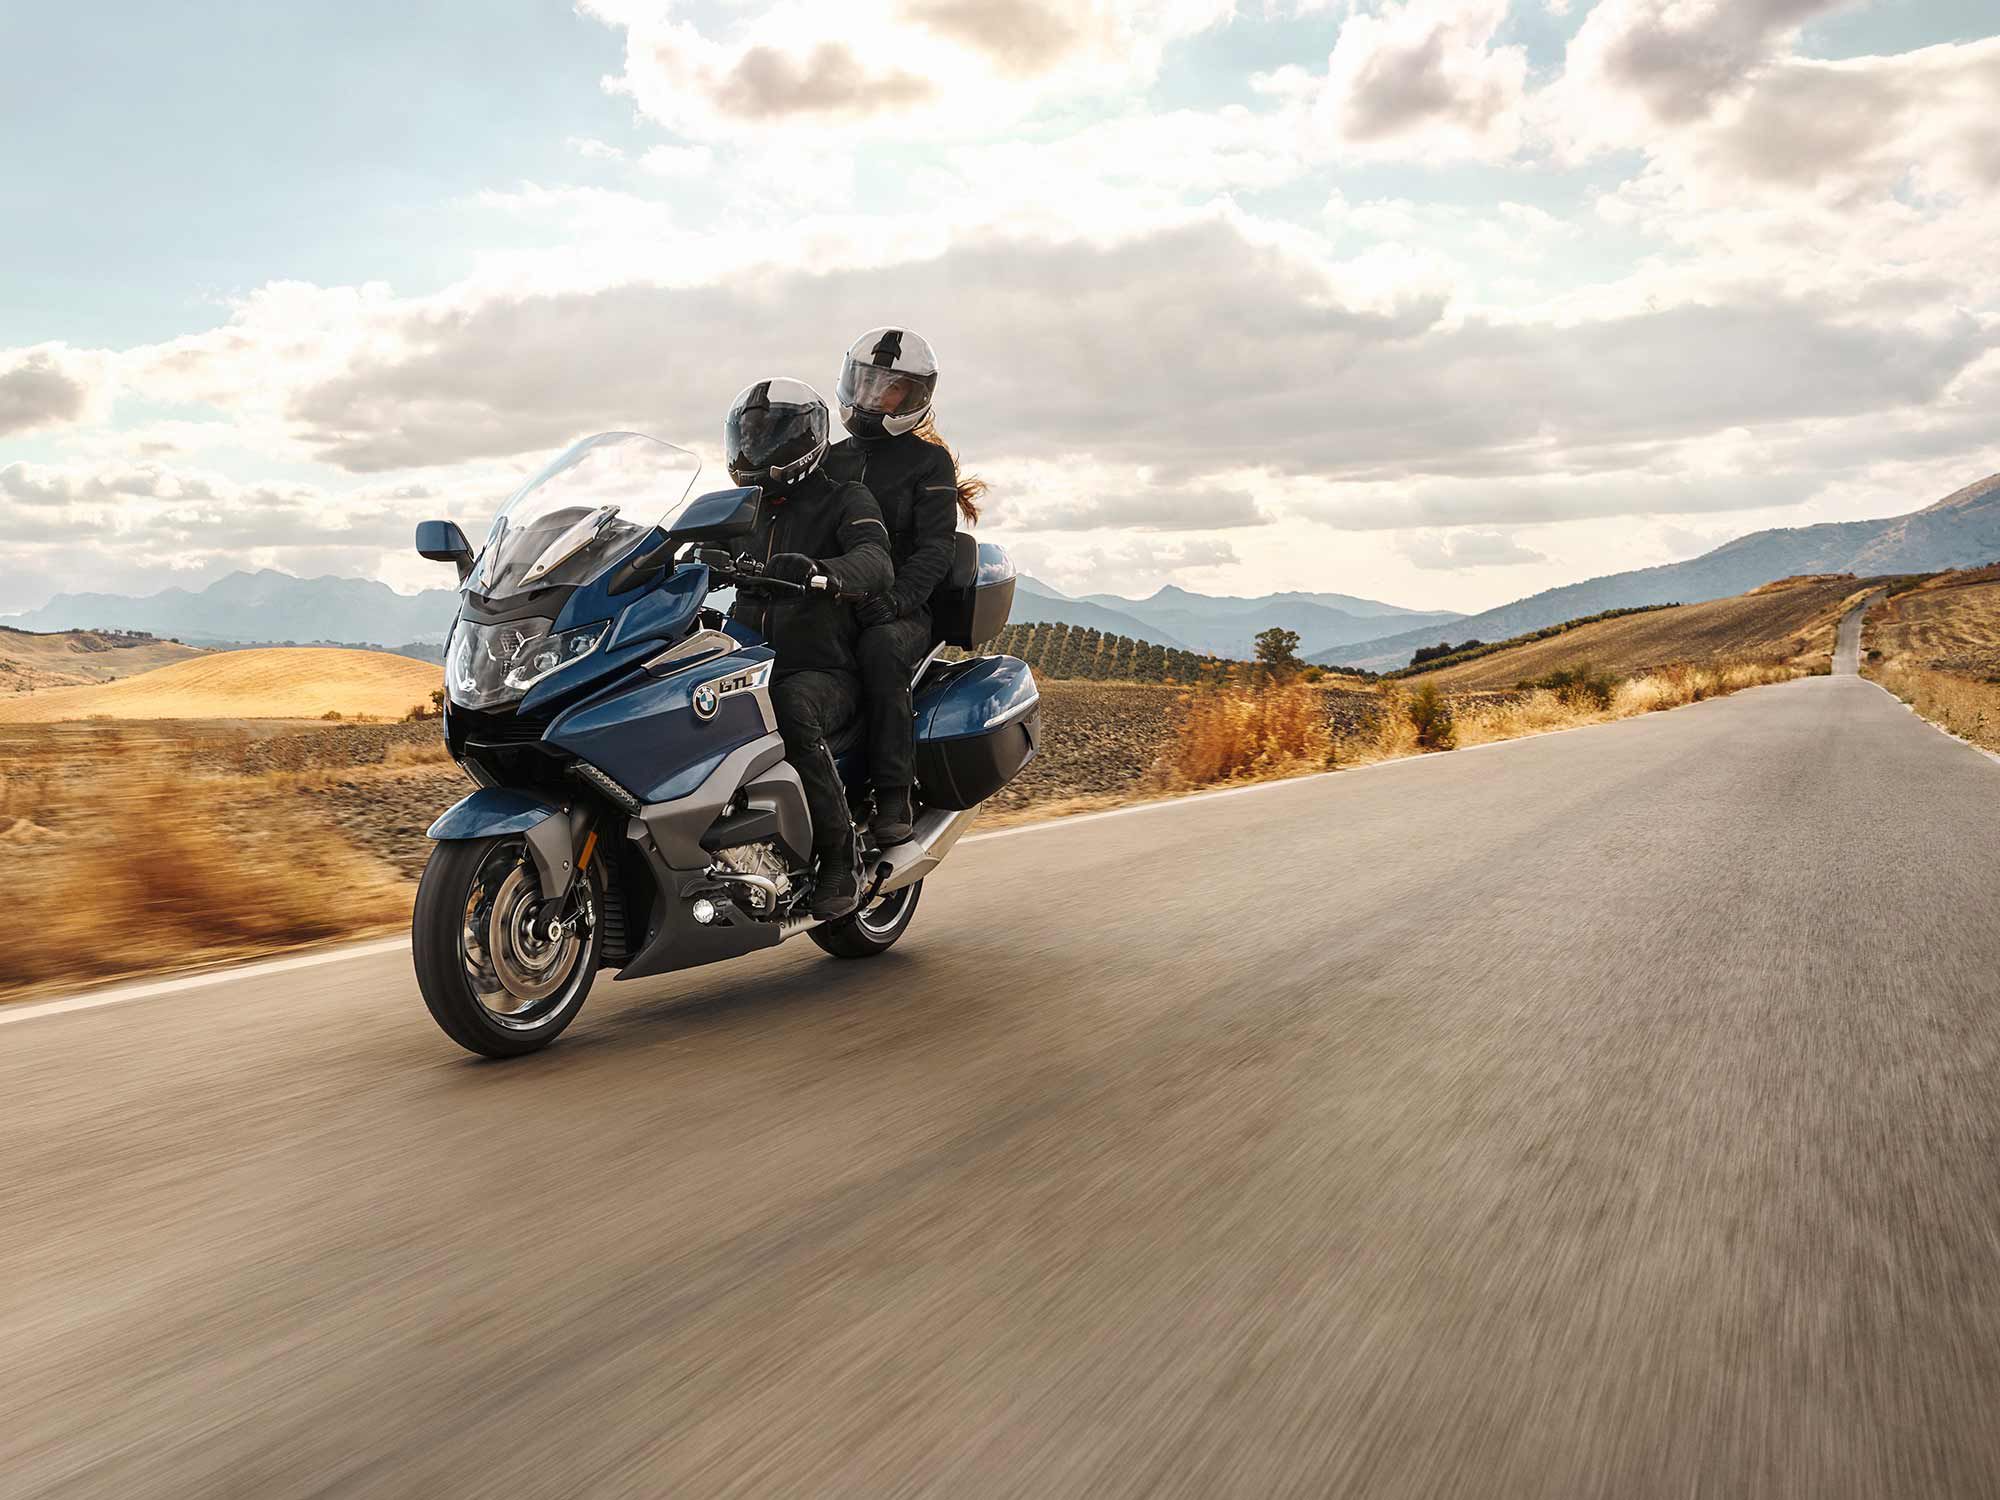 The BMW K 1600 GTL is a popular option for riders who often head out with a passenger.